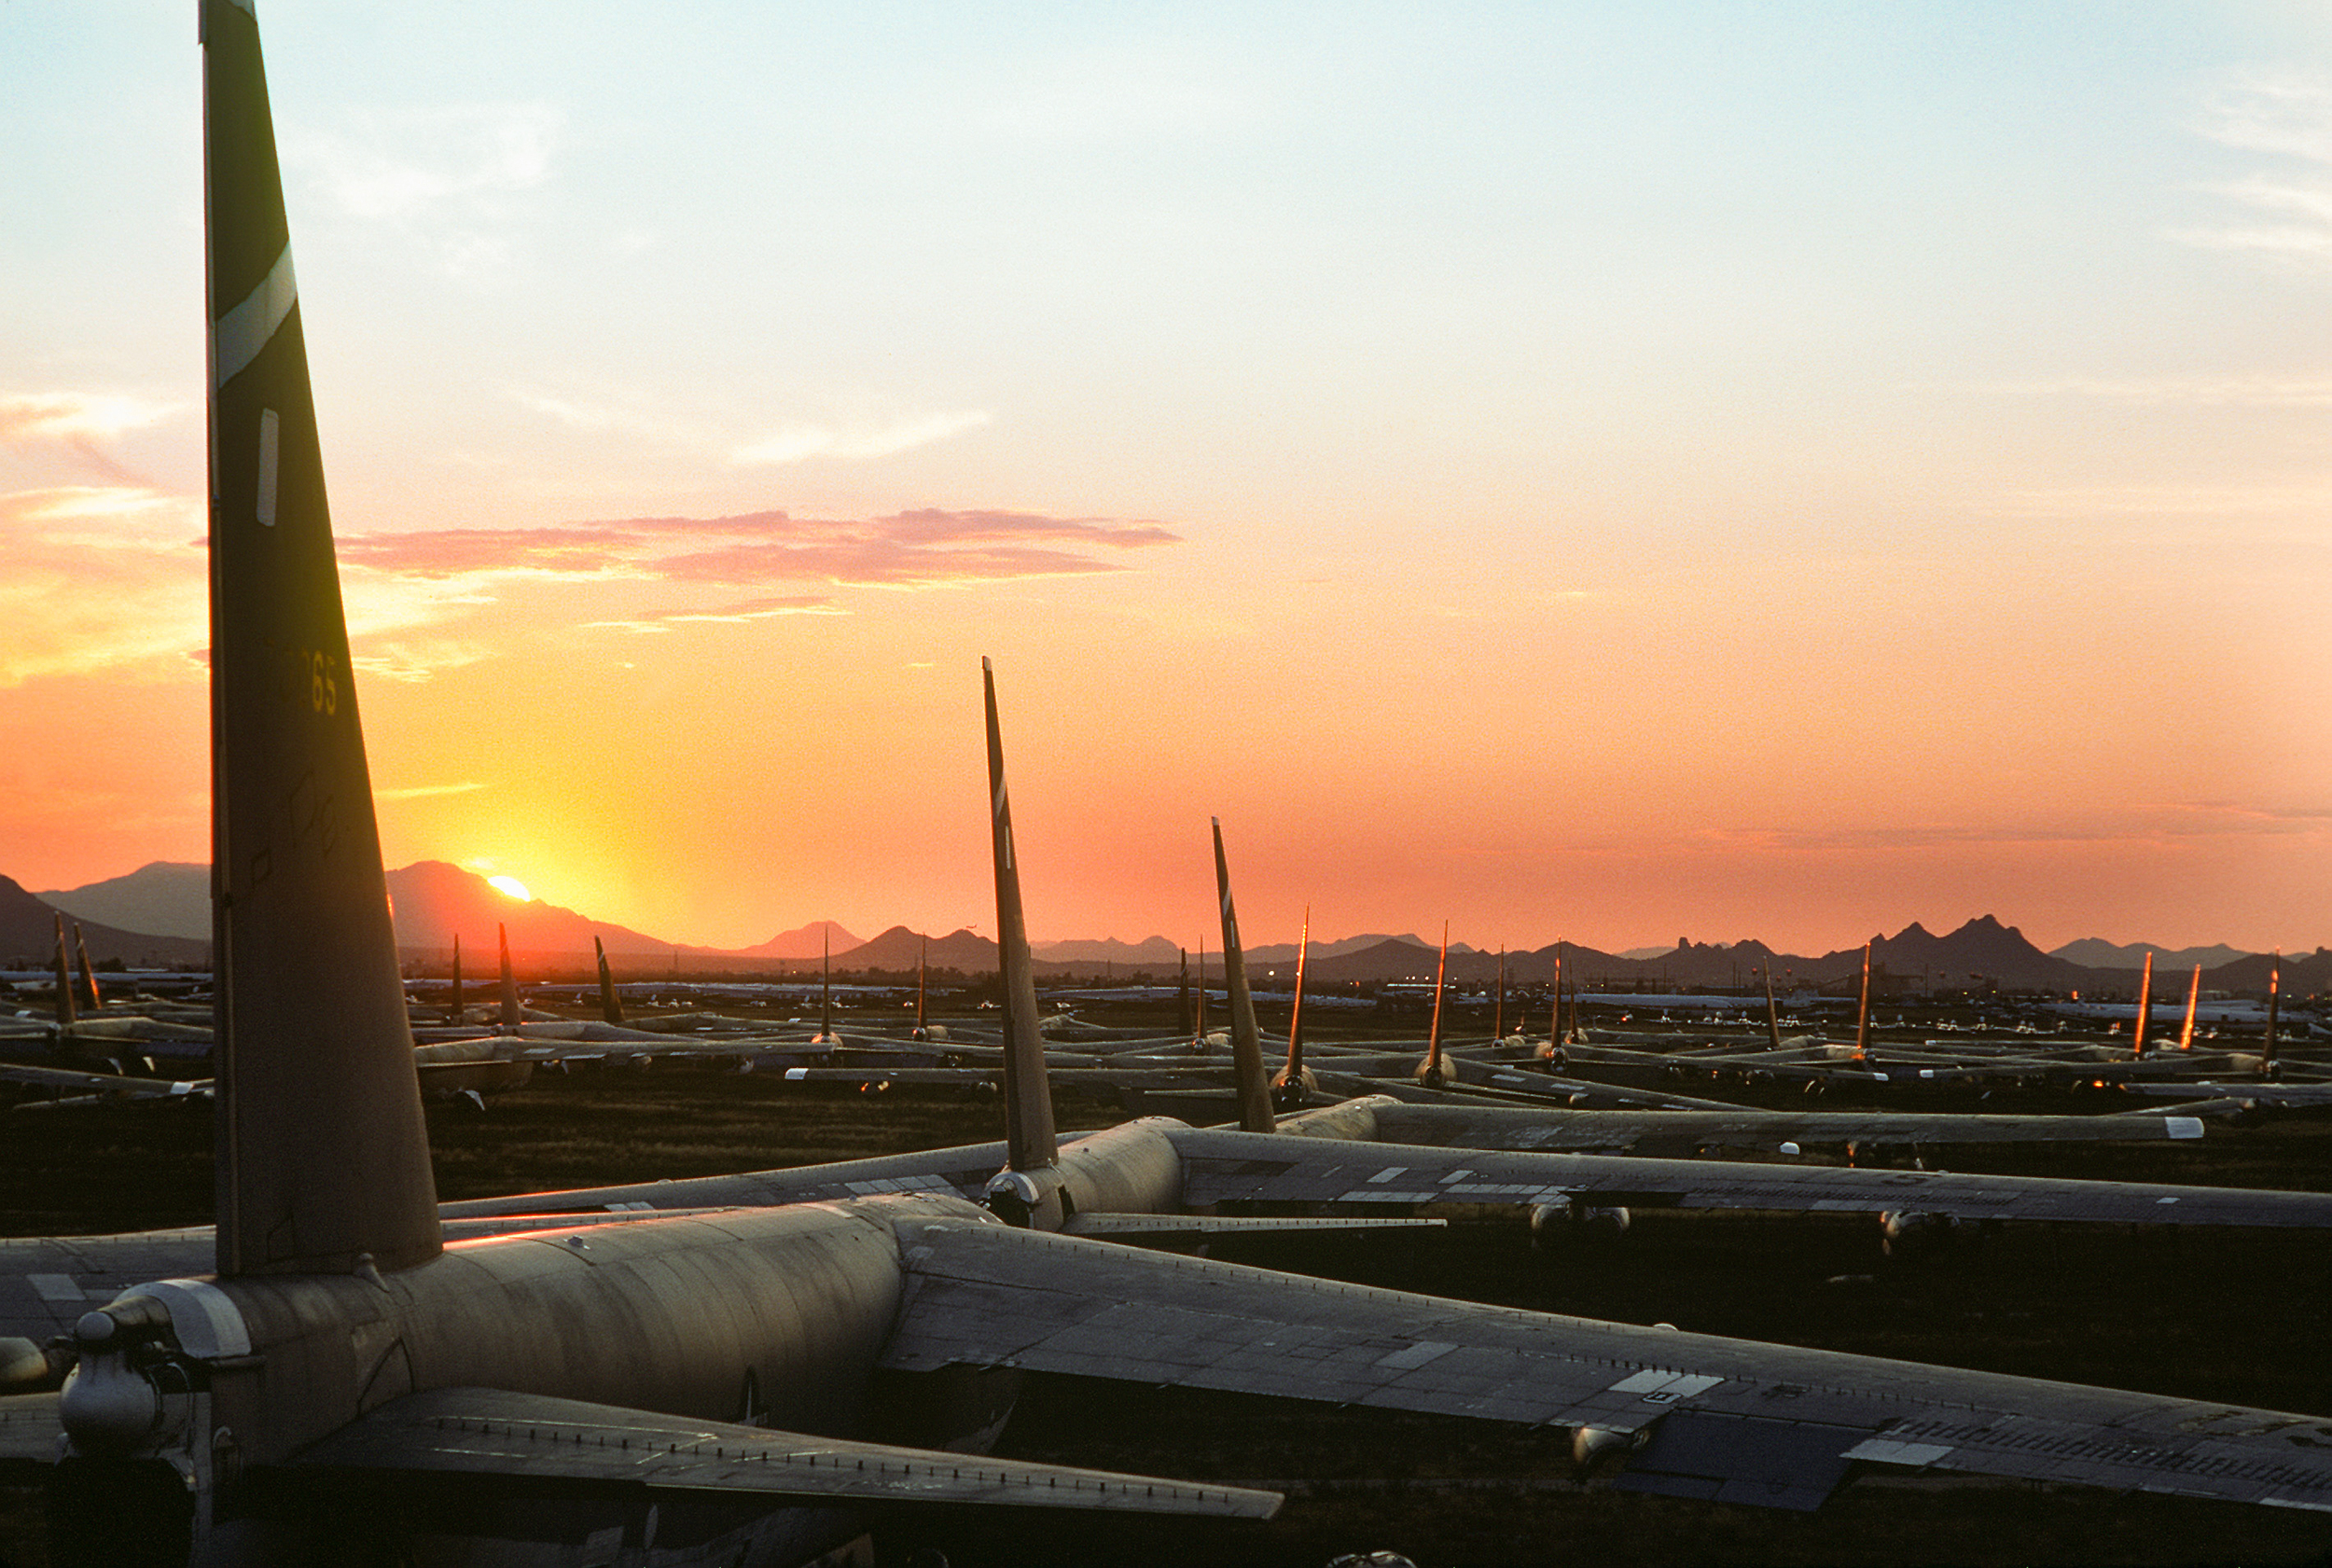 Dozens_of_B-52_Stratofortress_aircraft_are_bathed_in_the_glow_of_the_setting_sun_as_they_sit_on_the_desert_floor_at_the_Aerospace_Maintenance_and_Regeneration_Center_DF-ST-89-10582.jpg